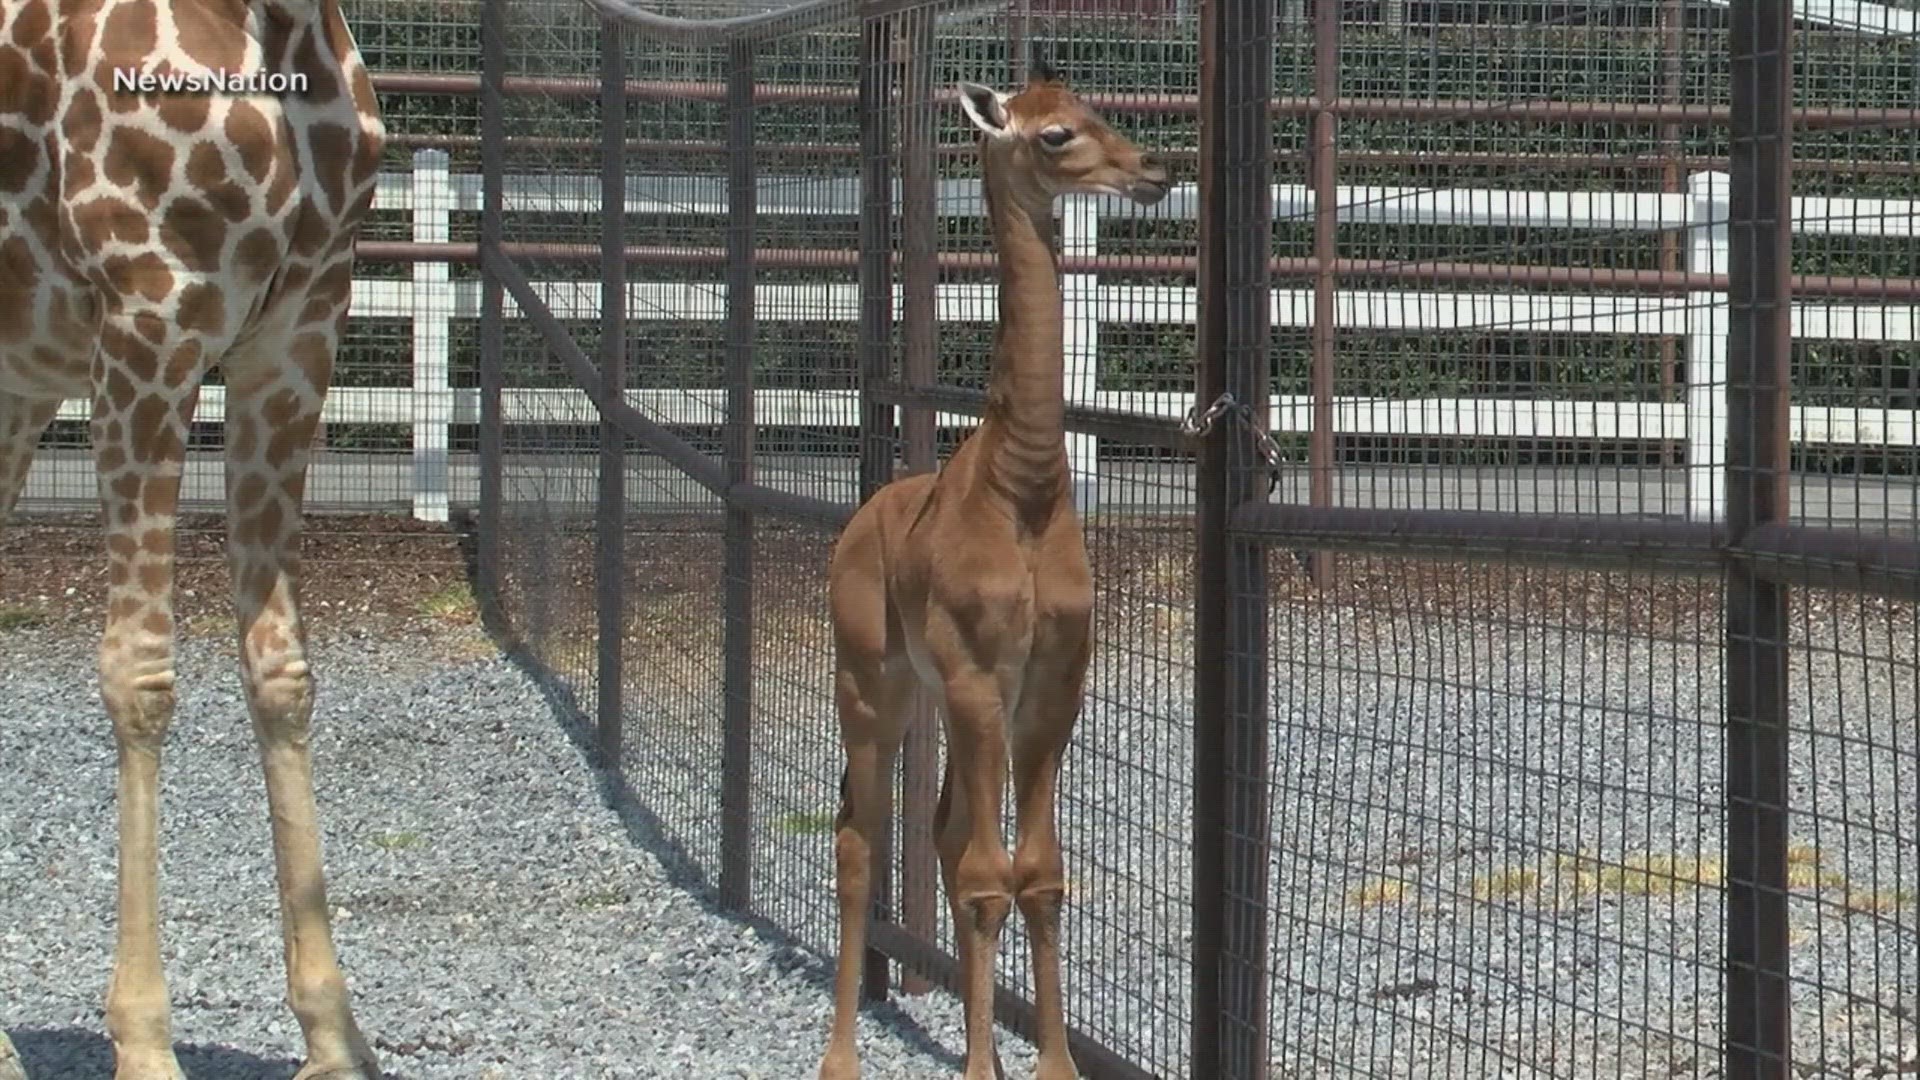 The giraffe born without spots on July 31 is the only one of her kind on Earth, according to zoo officials.